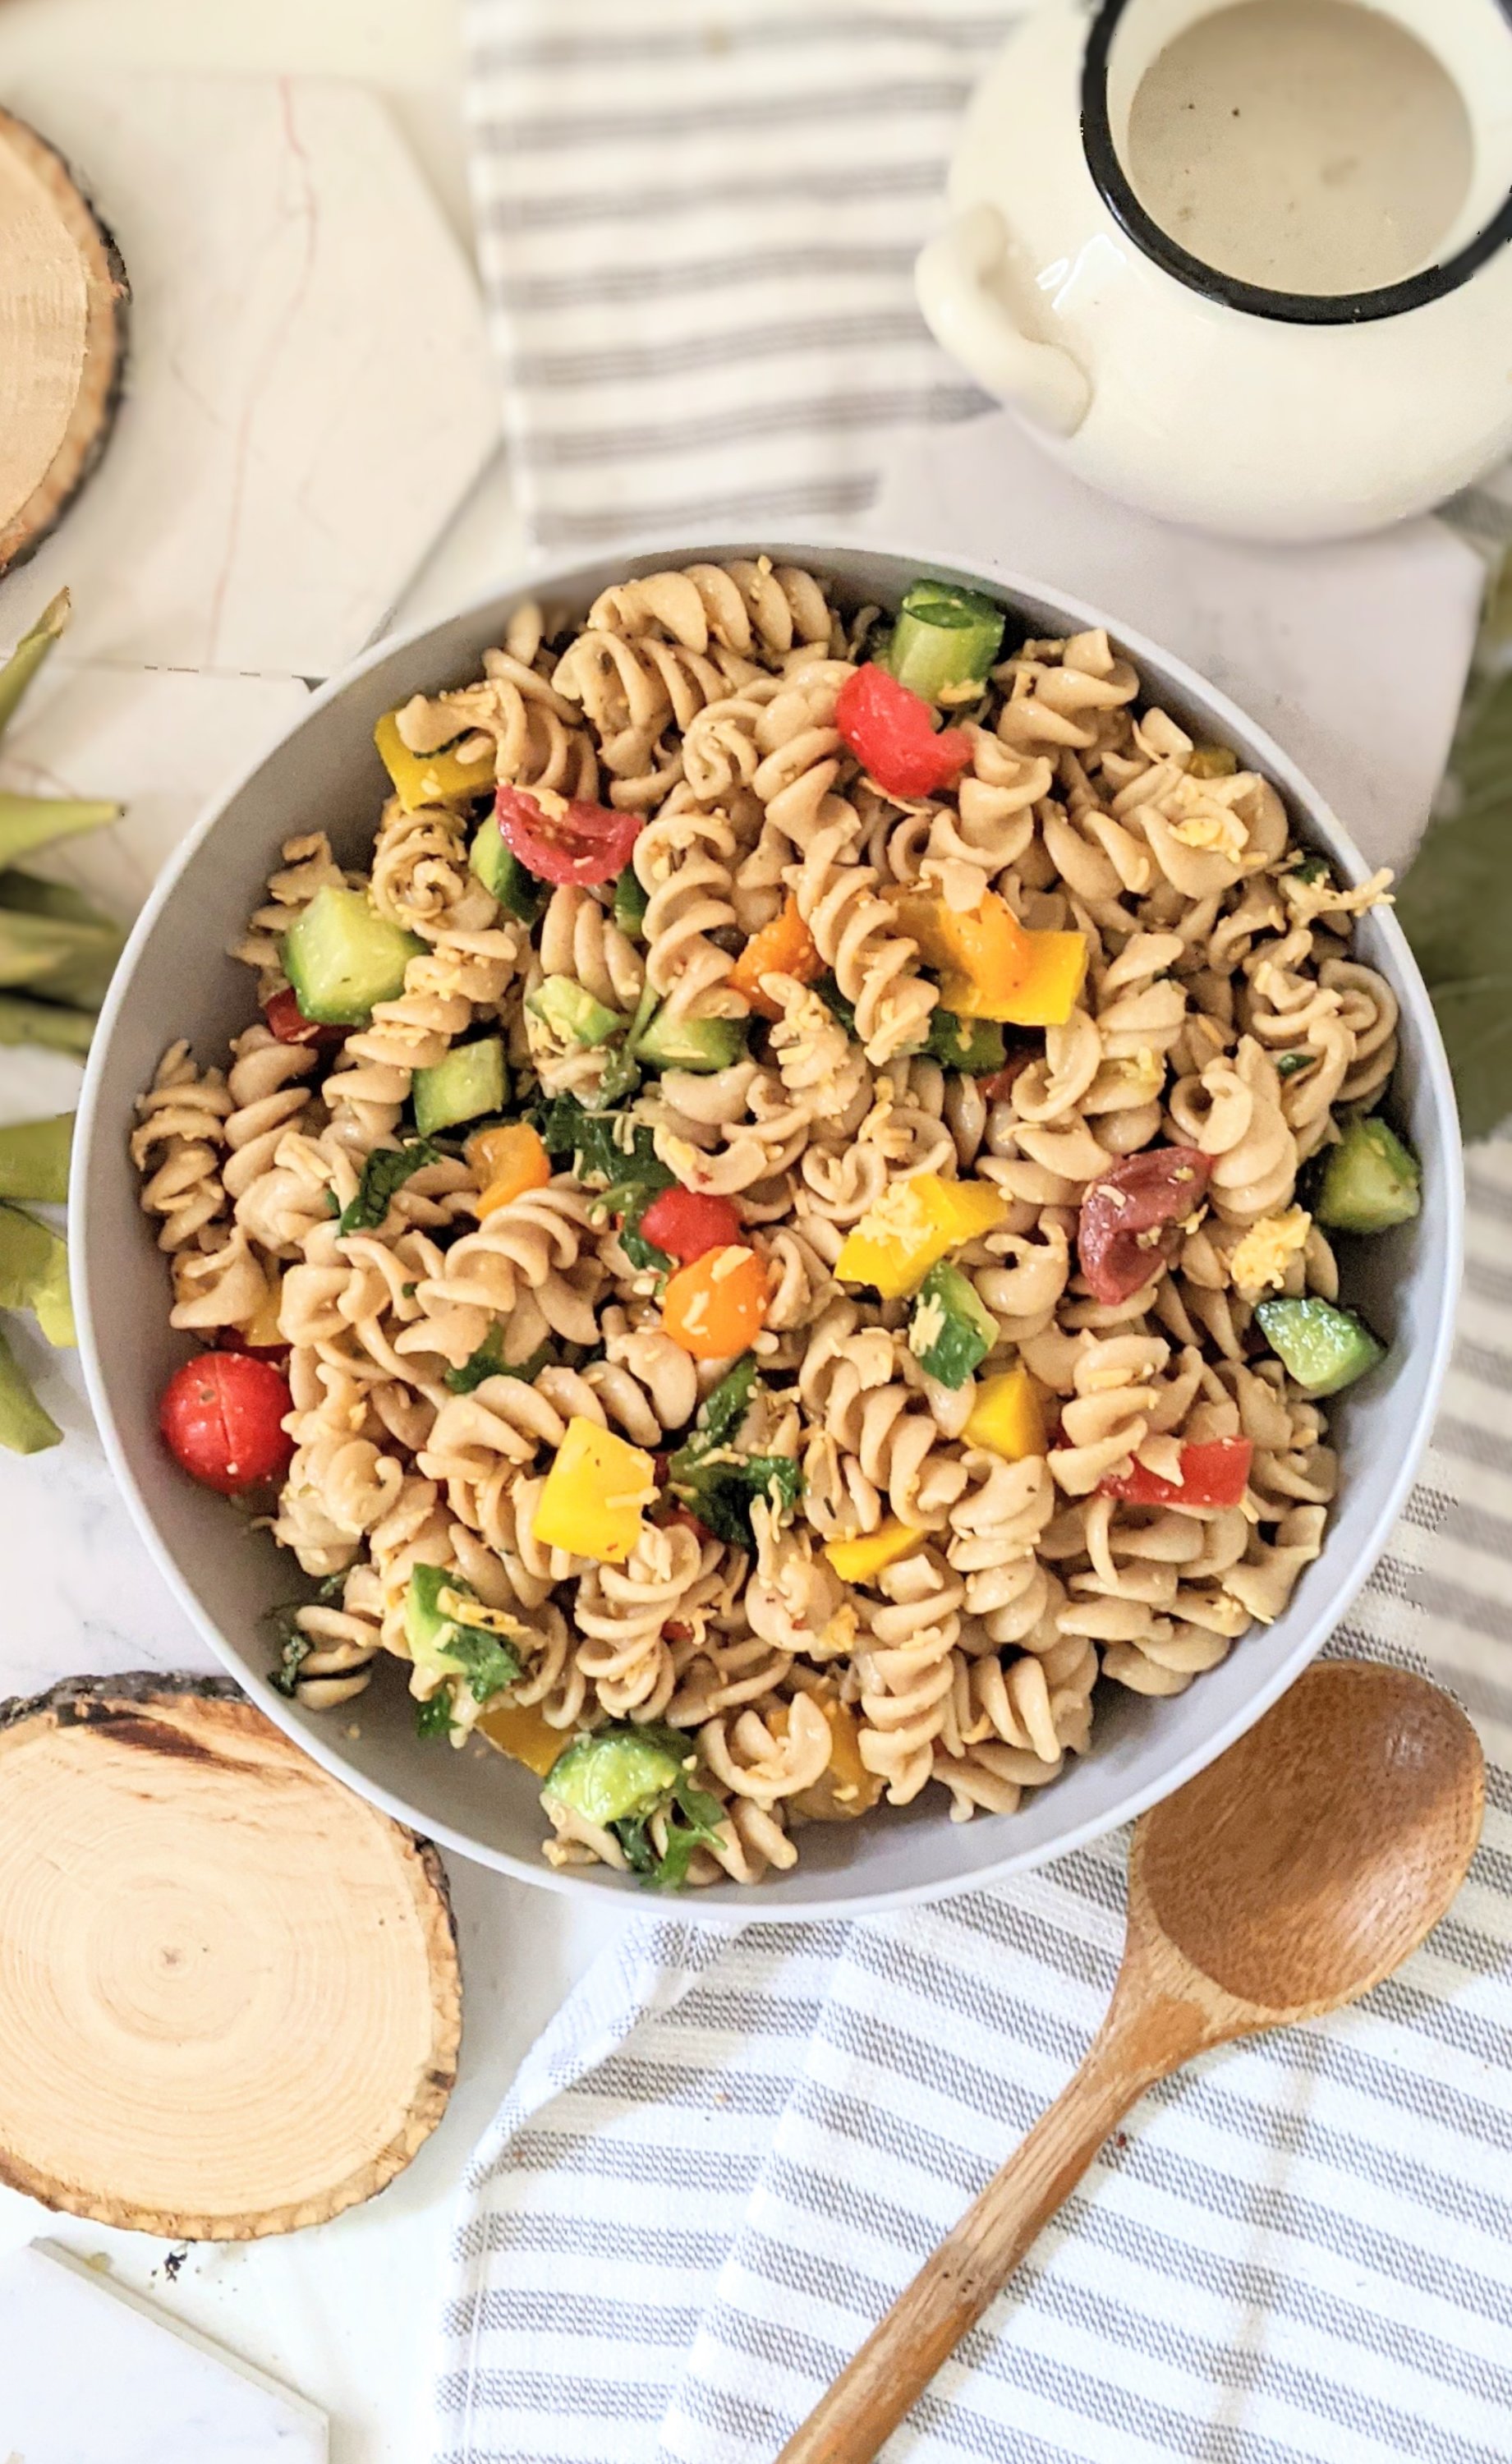 summe produce pasta salad what to do with leftover garden tomatoes and cucumber pasta salad vegetarian gluten free pastas for summer recipes for backyard bbq side dishes no meat